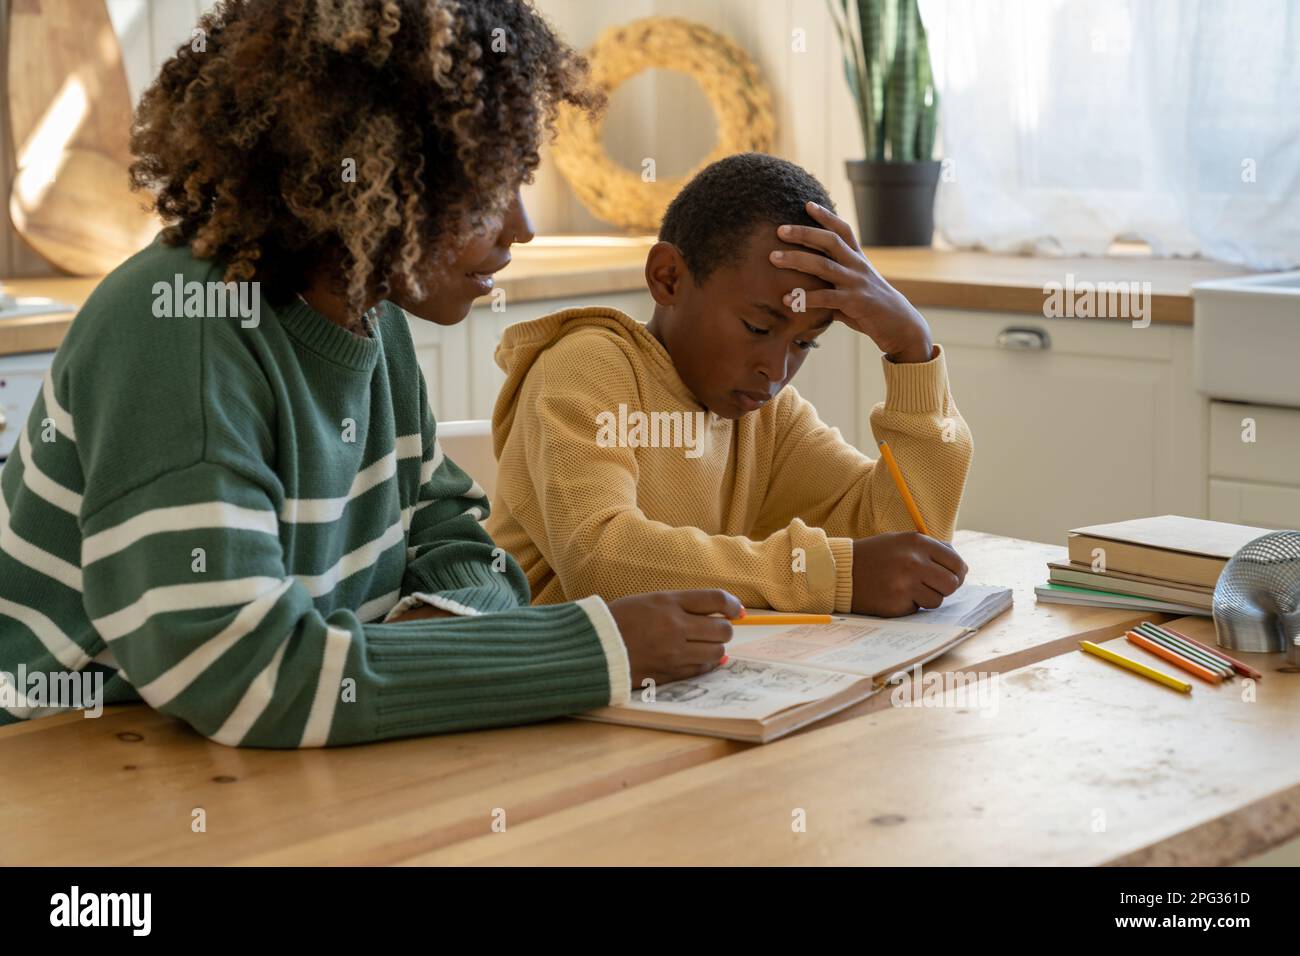 Caring African American mom support pensive schoolboy adopted son with education assignment at home Stock Photo